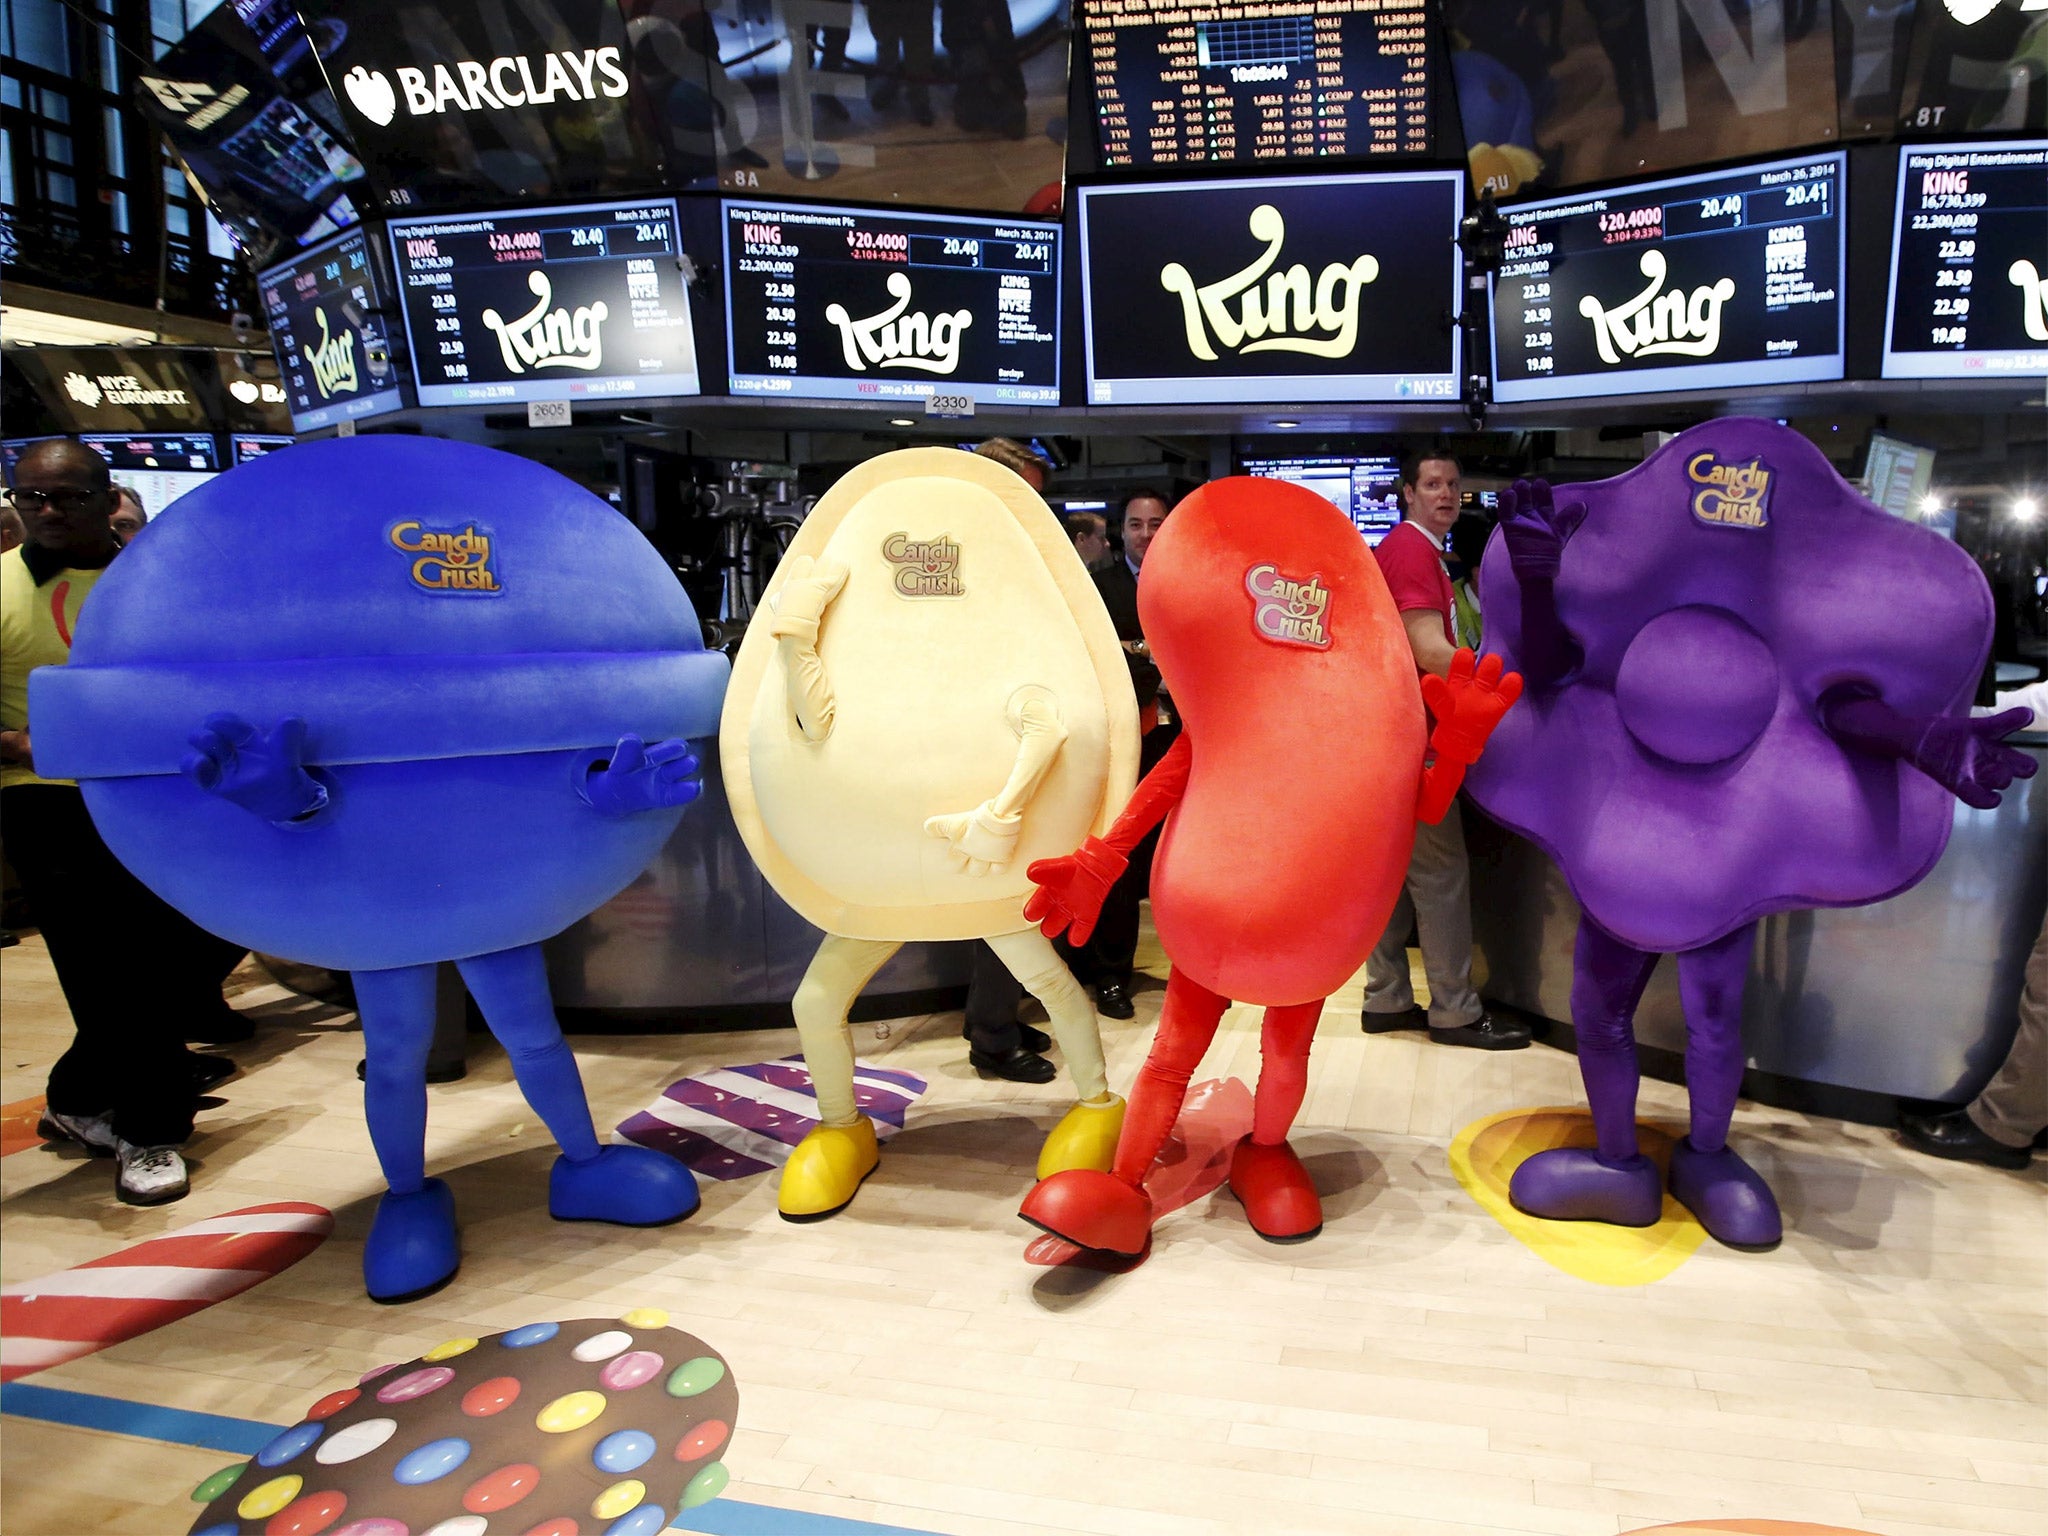 ‘Candy Crush’ characters at King Digital’s IPO last year. The firm has been one of the major success stories of the mobile gaming explosion of the past few years